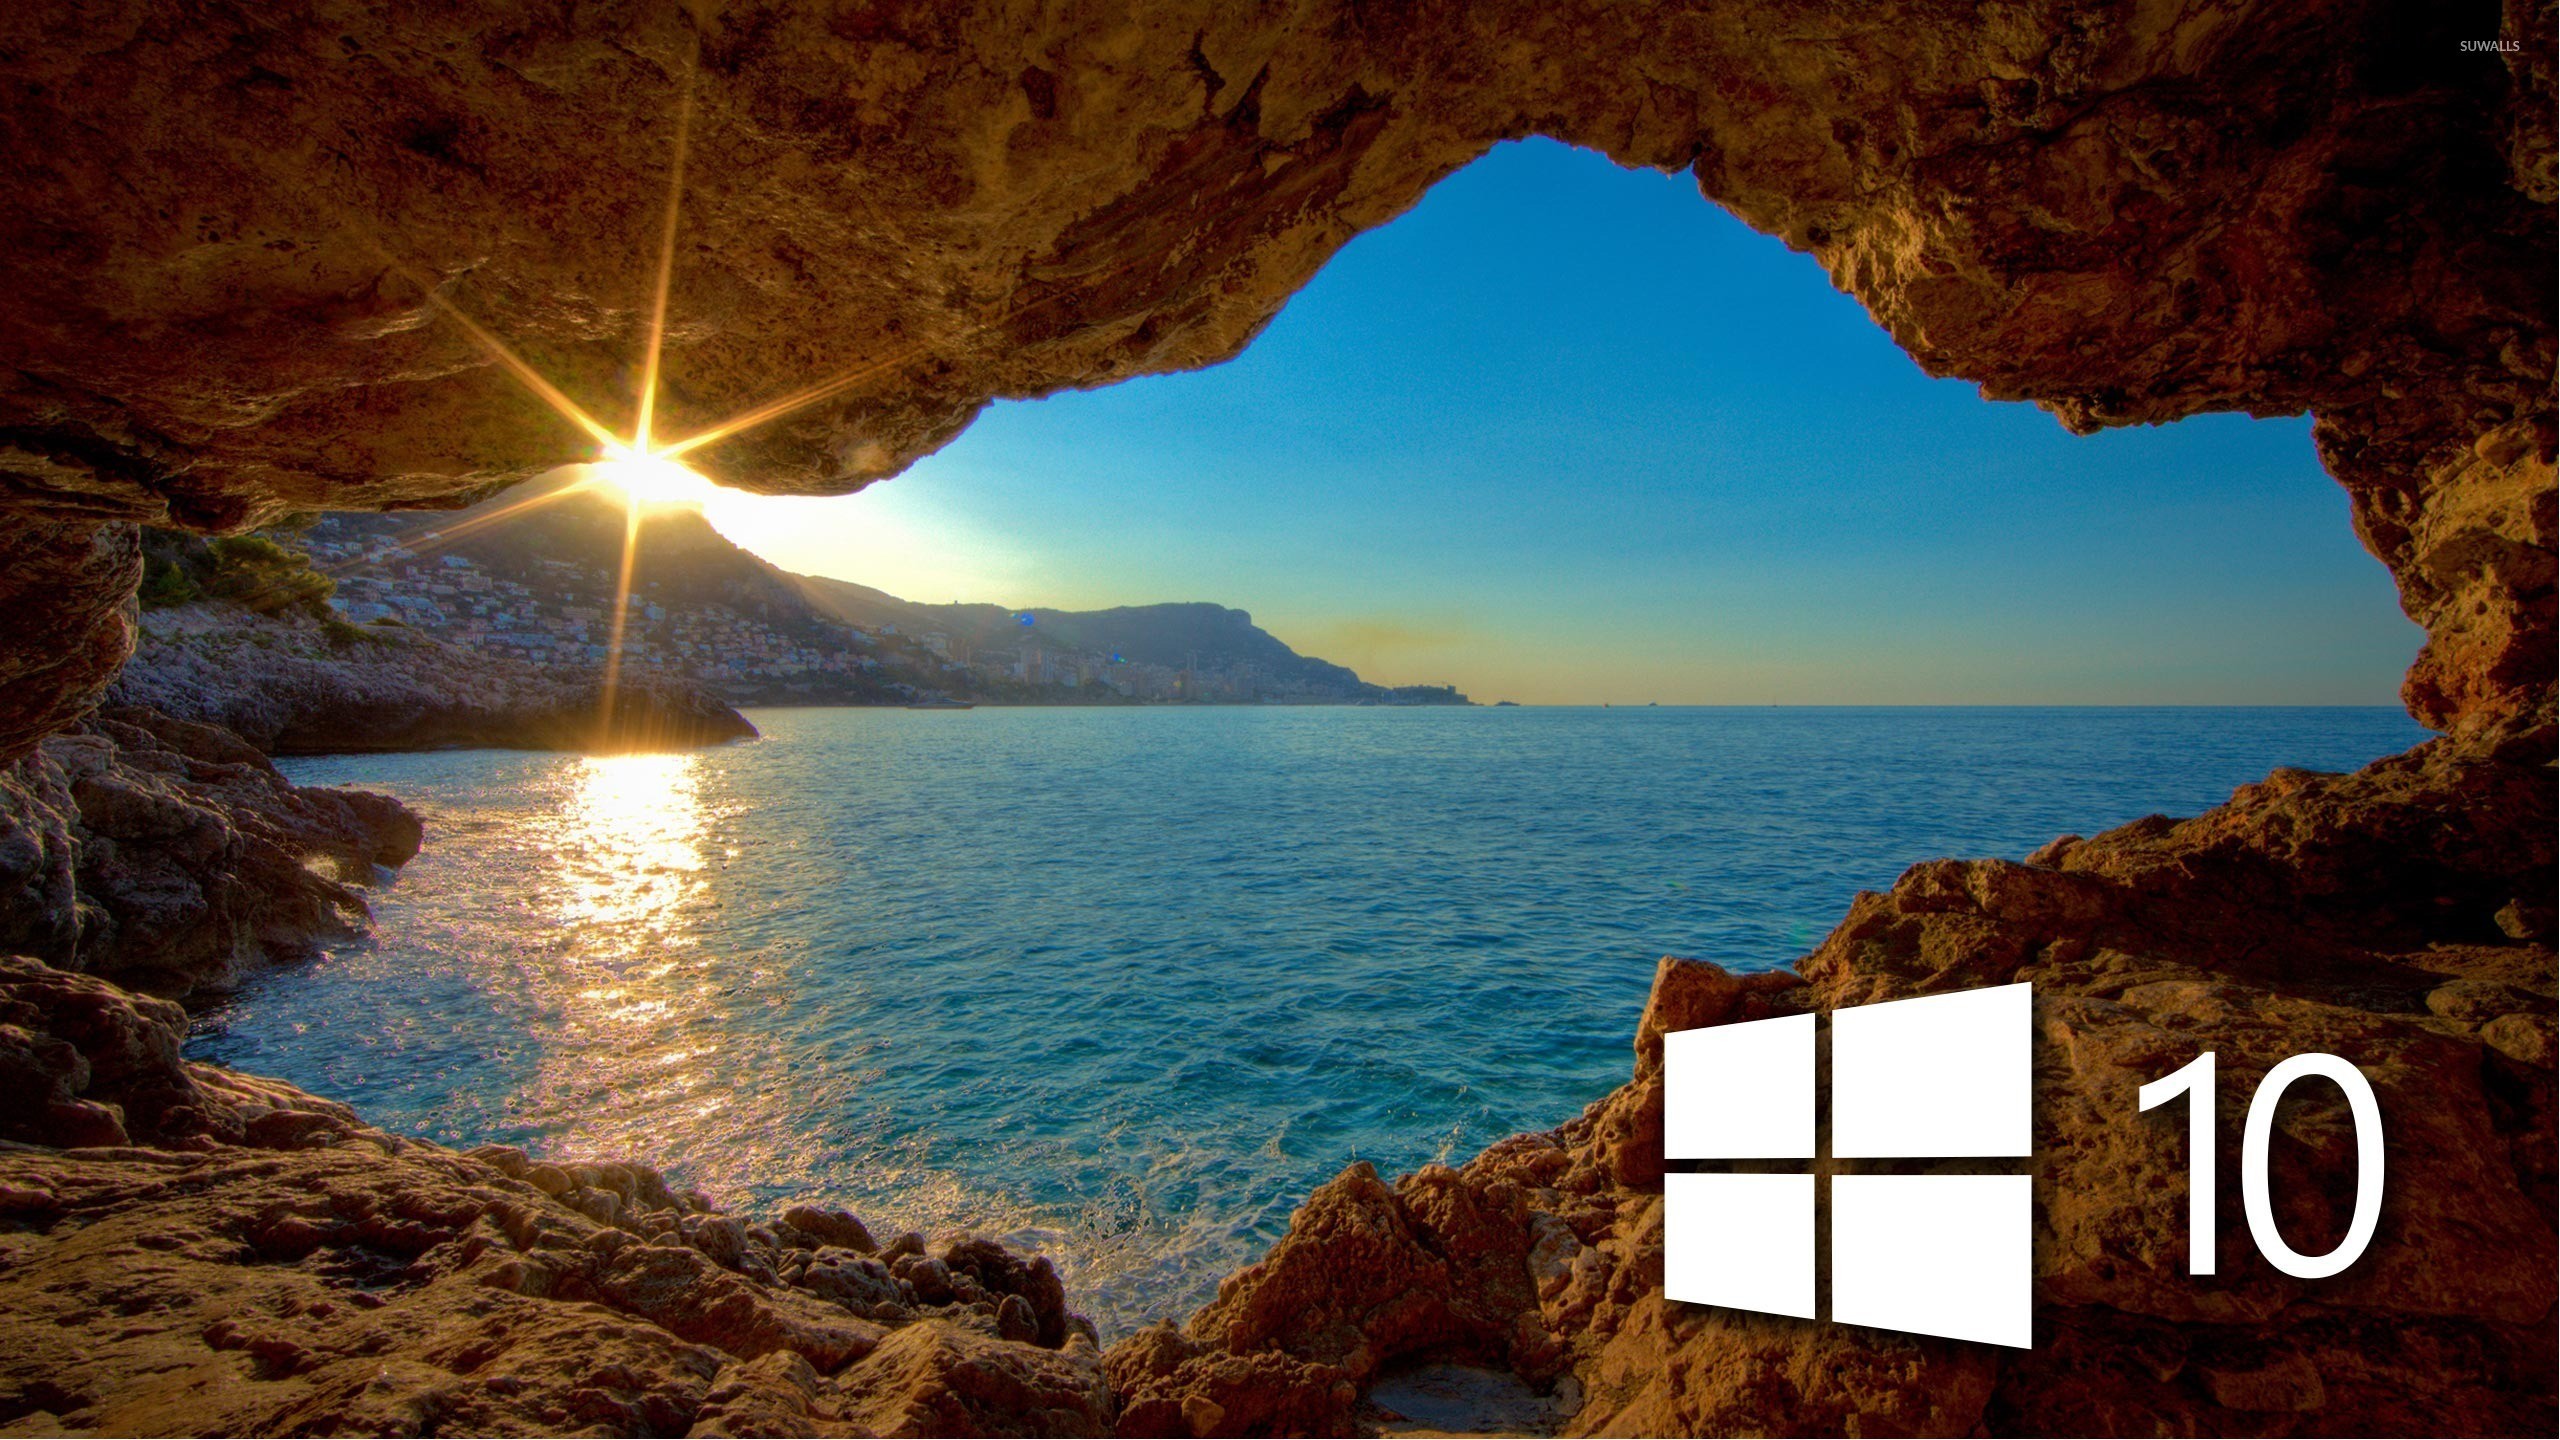 can you download screensavers for windows 10